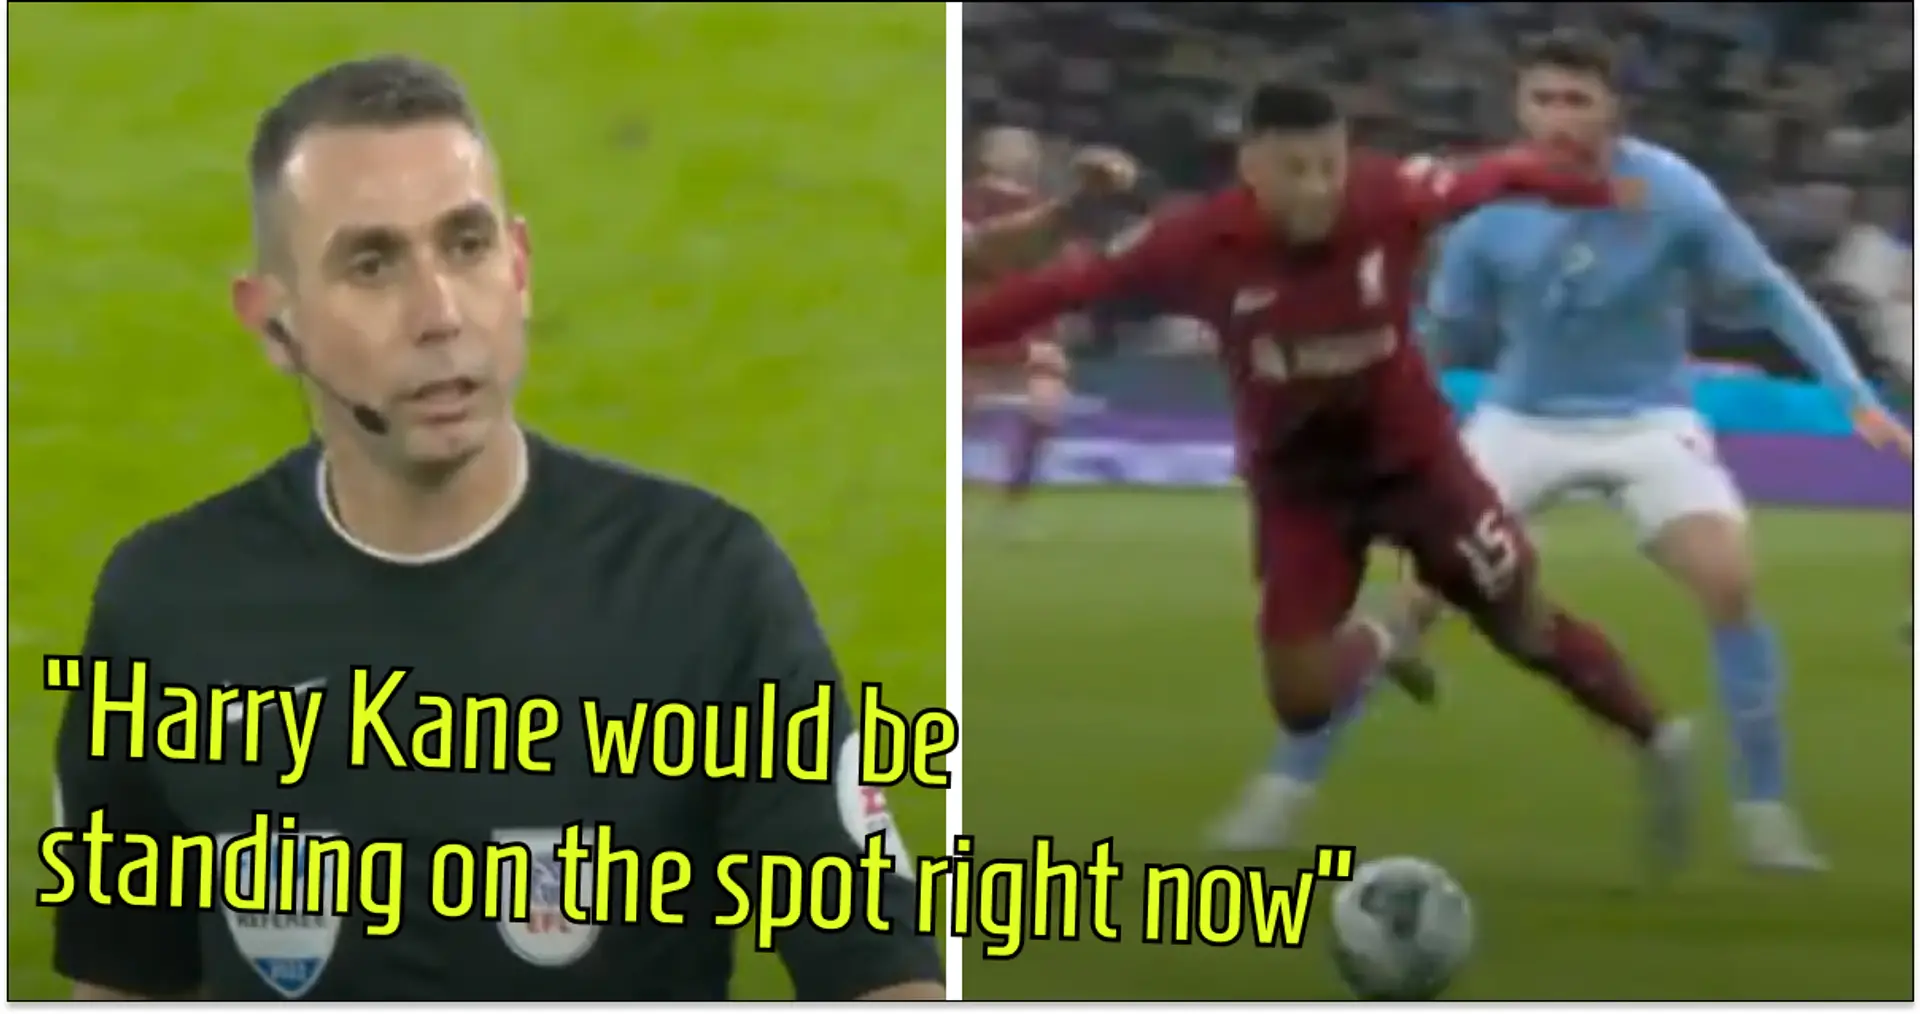 'Congrats VARCity': Liverpool fans slam referee for not giving Reds penalty in City game